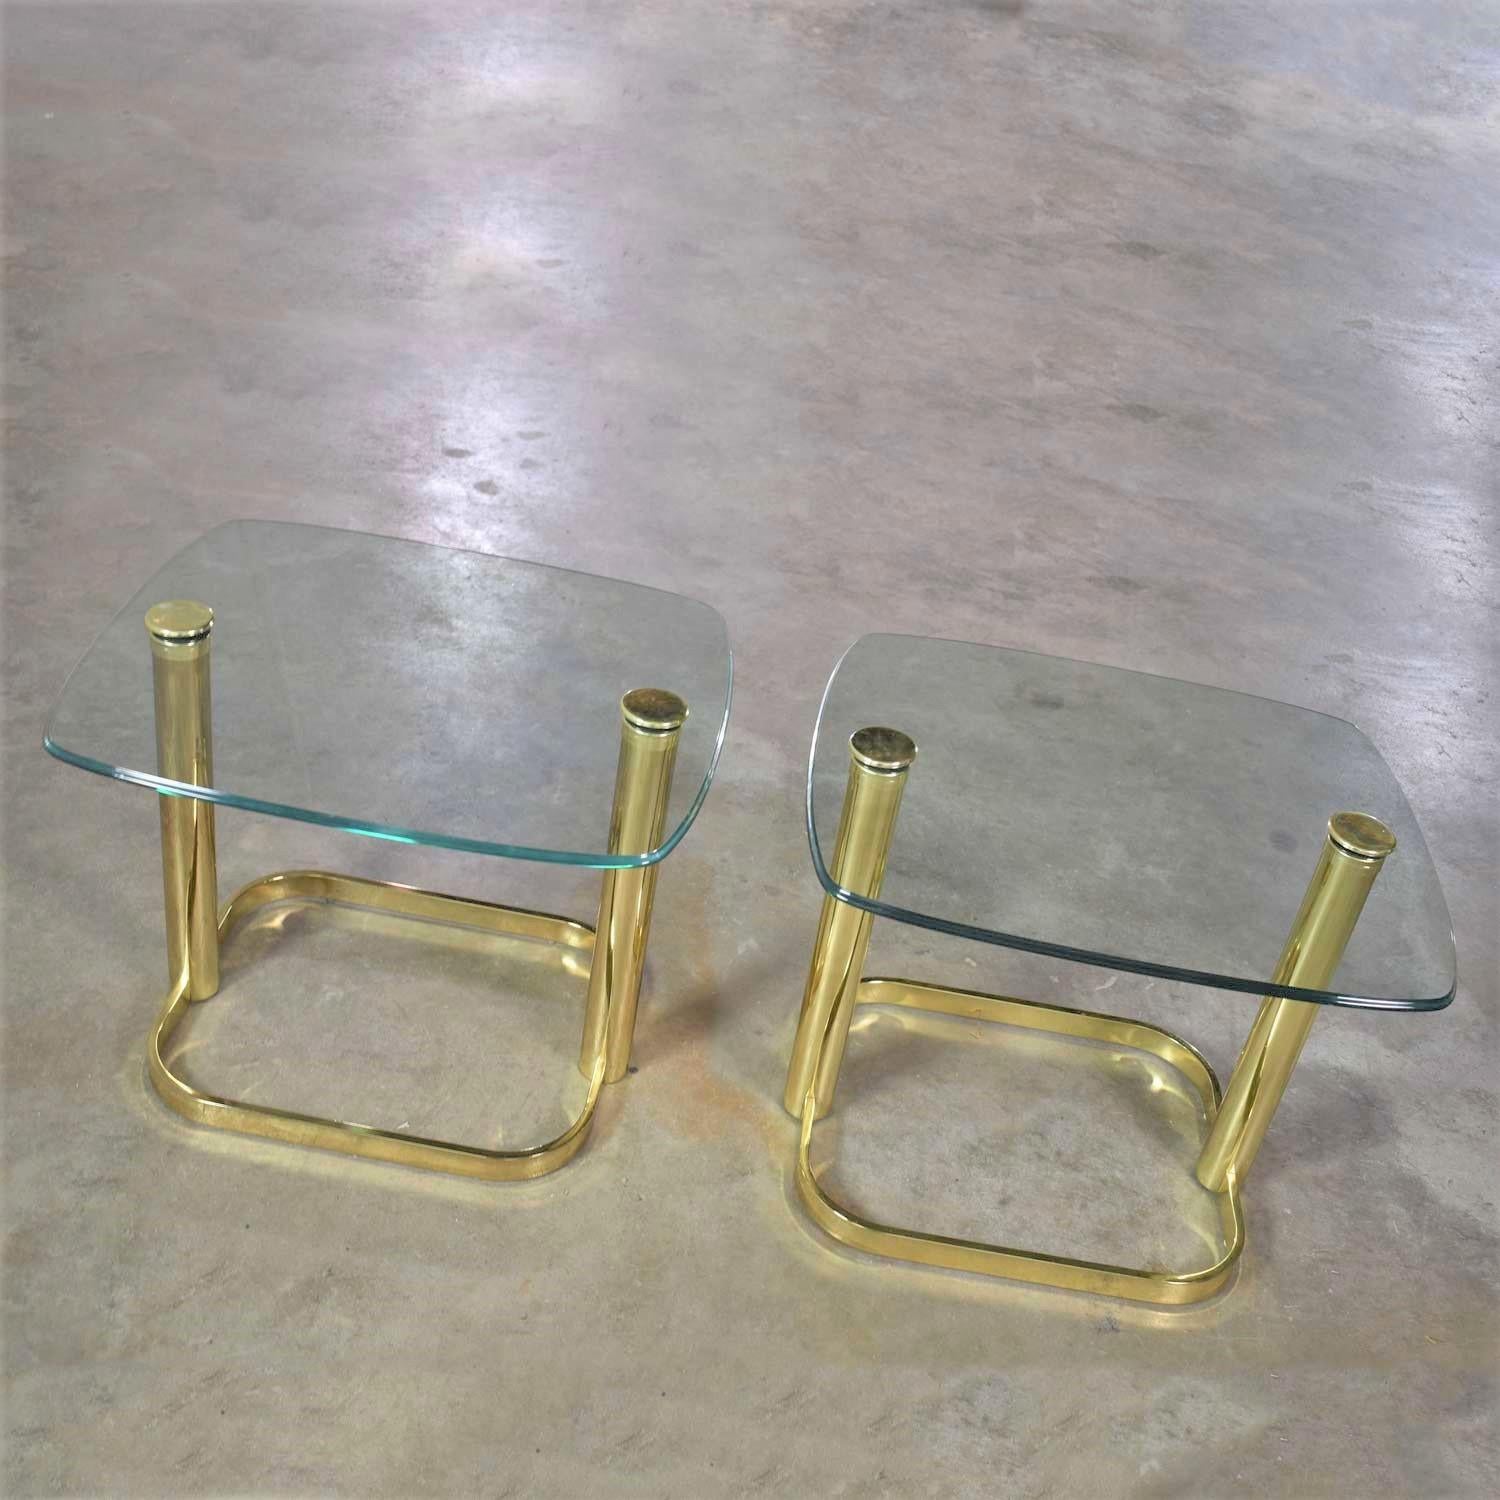 Plated Modern Pair of End Tables Brass Plate & Glass Attr Rosen for The Pace Collection